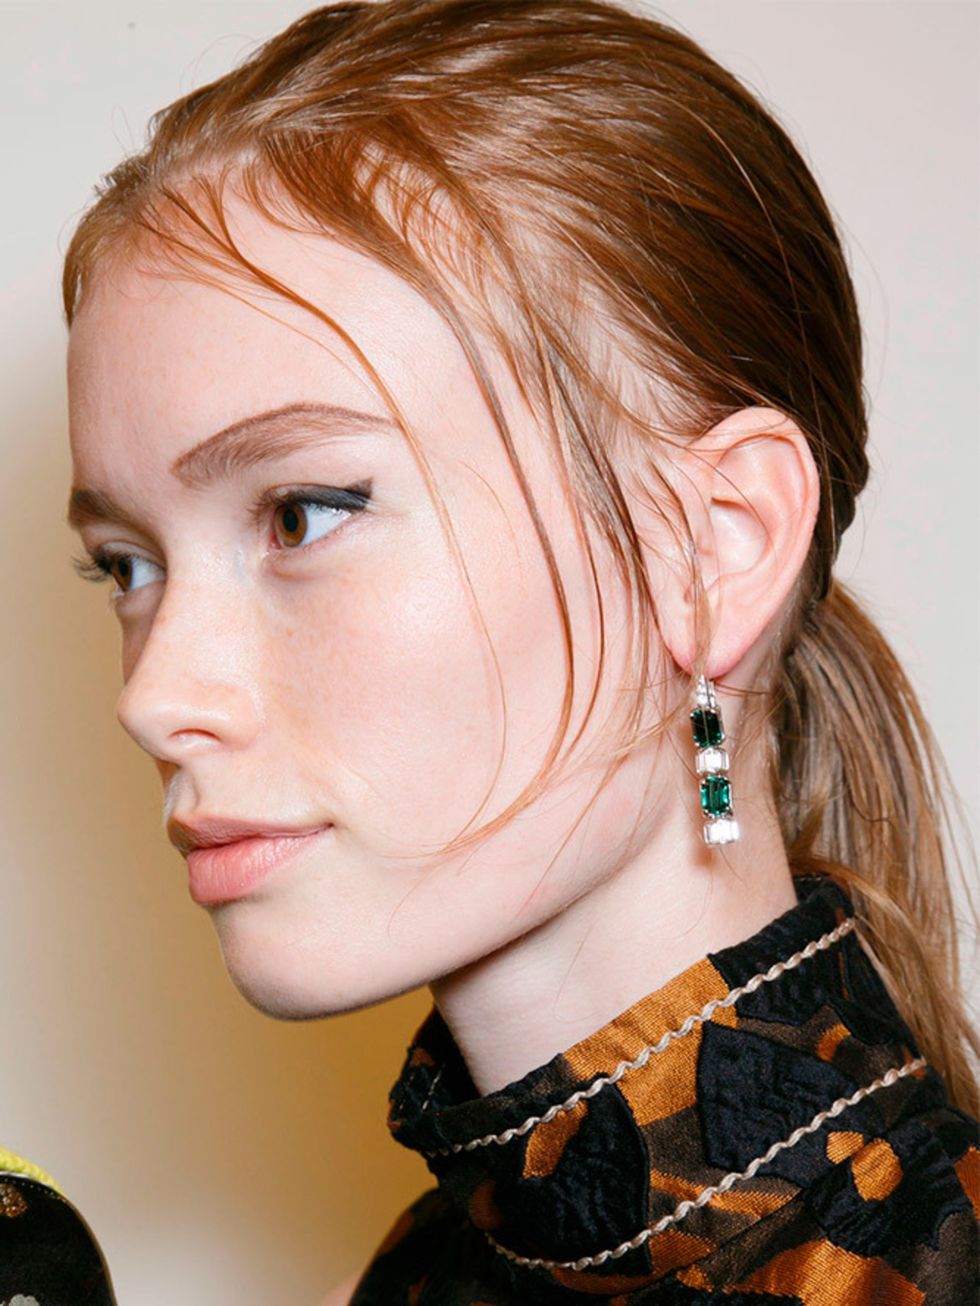 <p><a href="http://www.elleuk.com/catwalk/prada/spring-summer-2015">Prada </a></p>

<p>The look: Tough ponytail</p>

<p>Hair stylist: Guido</p>

<p>Key products: Redken Diamond Oil Spray (out Dec) and Mess Around 10 Cream-Paste, £11.16 at <a href="http://